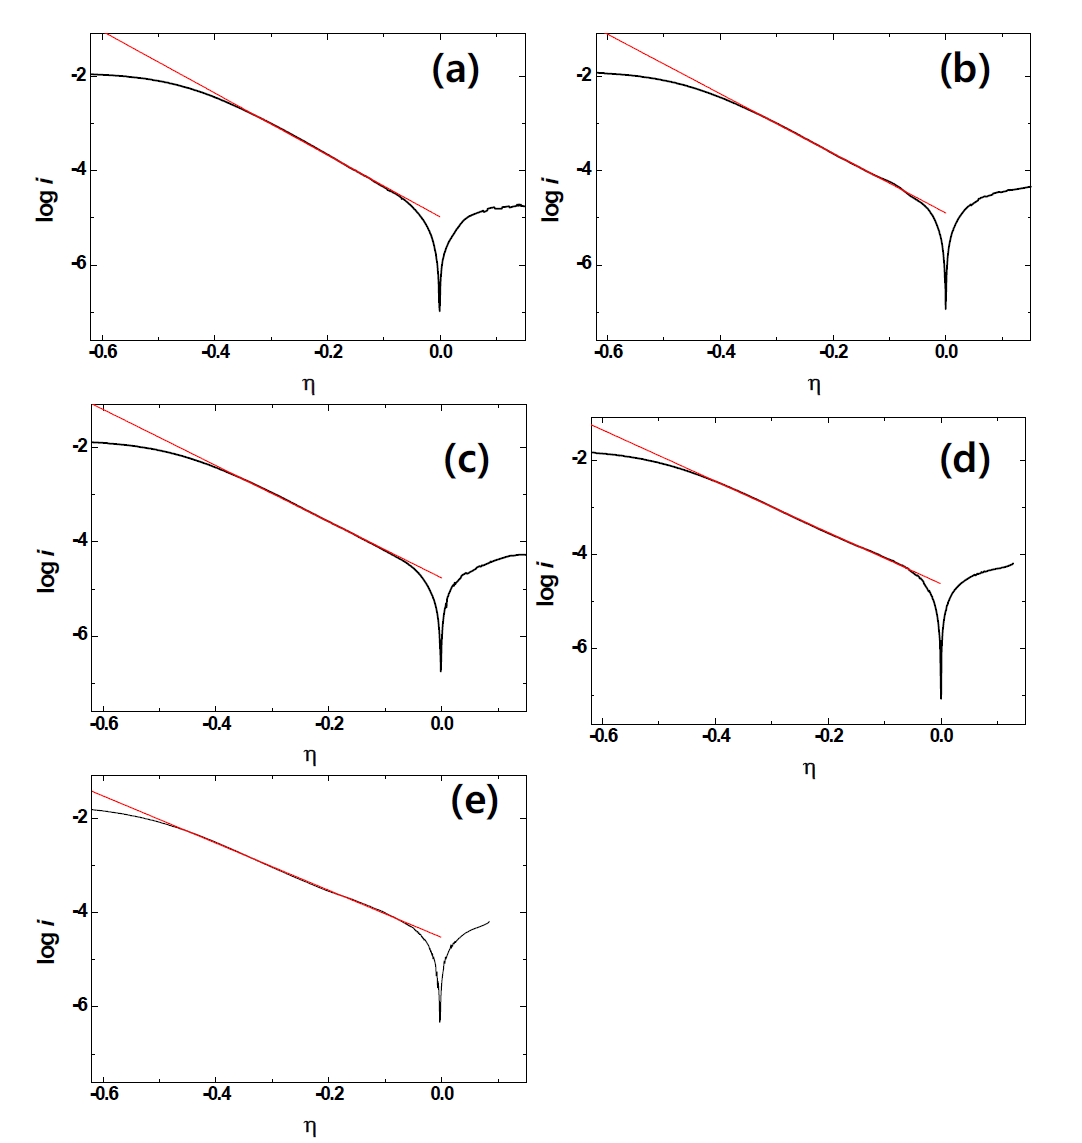 Tafel plots of Sm in LiCl-KCl melt on W electrode at (a) 723 K, (b) 743 K, (c) 763 K, (d) 783 K, and (e) 803 K. Scan rate and rotation rate are 5 mV/s and 1200 rpm, respectively